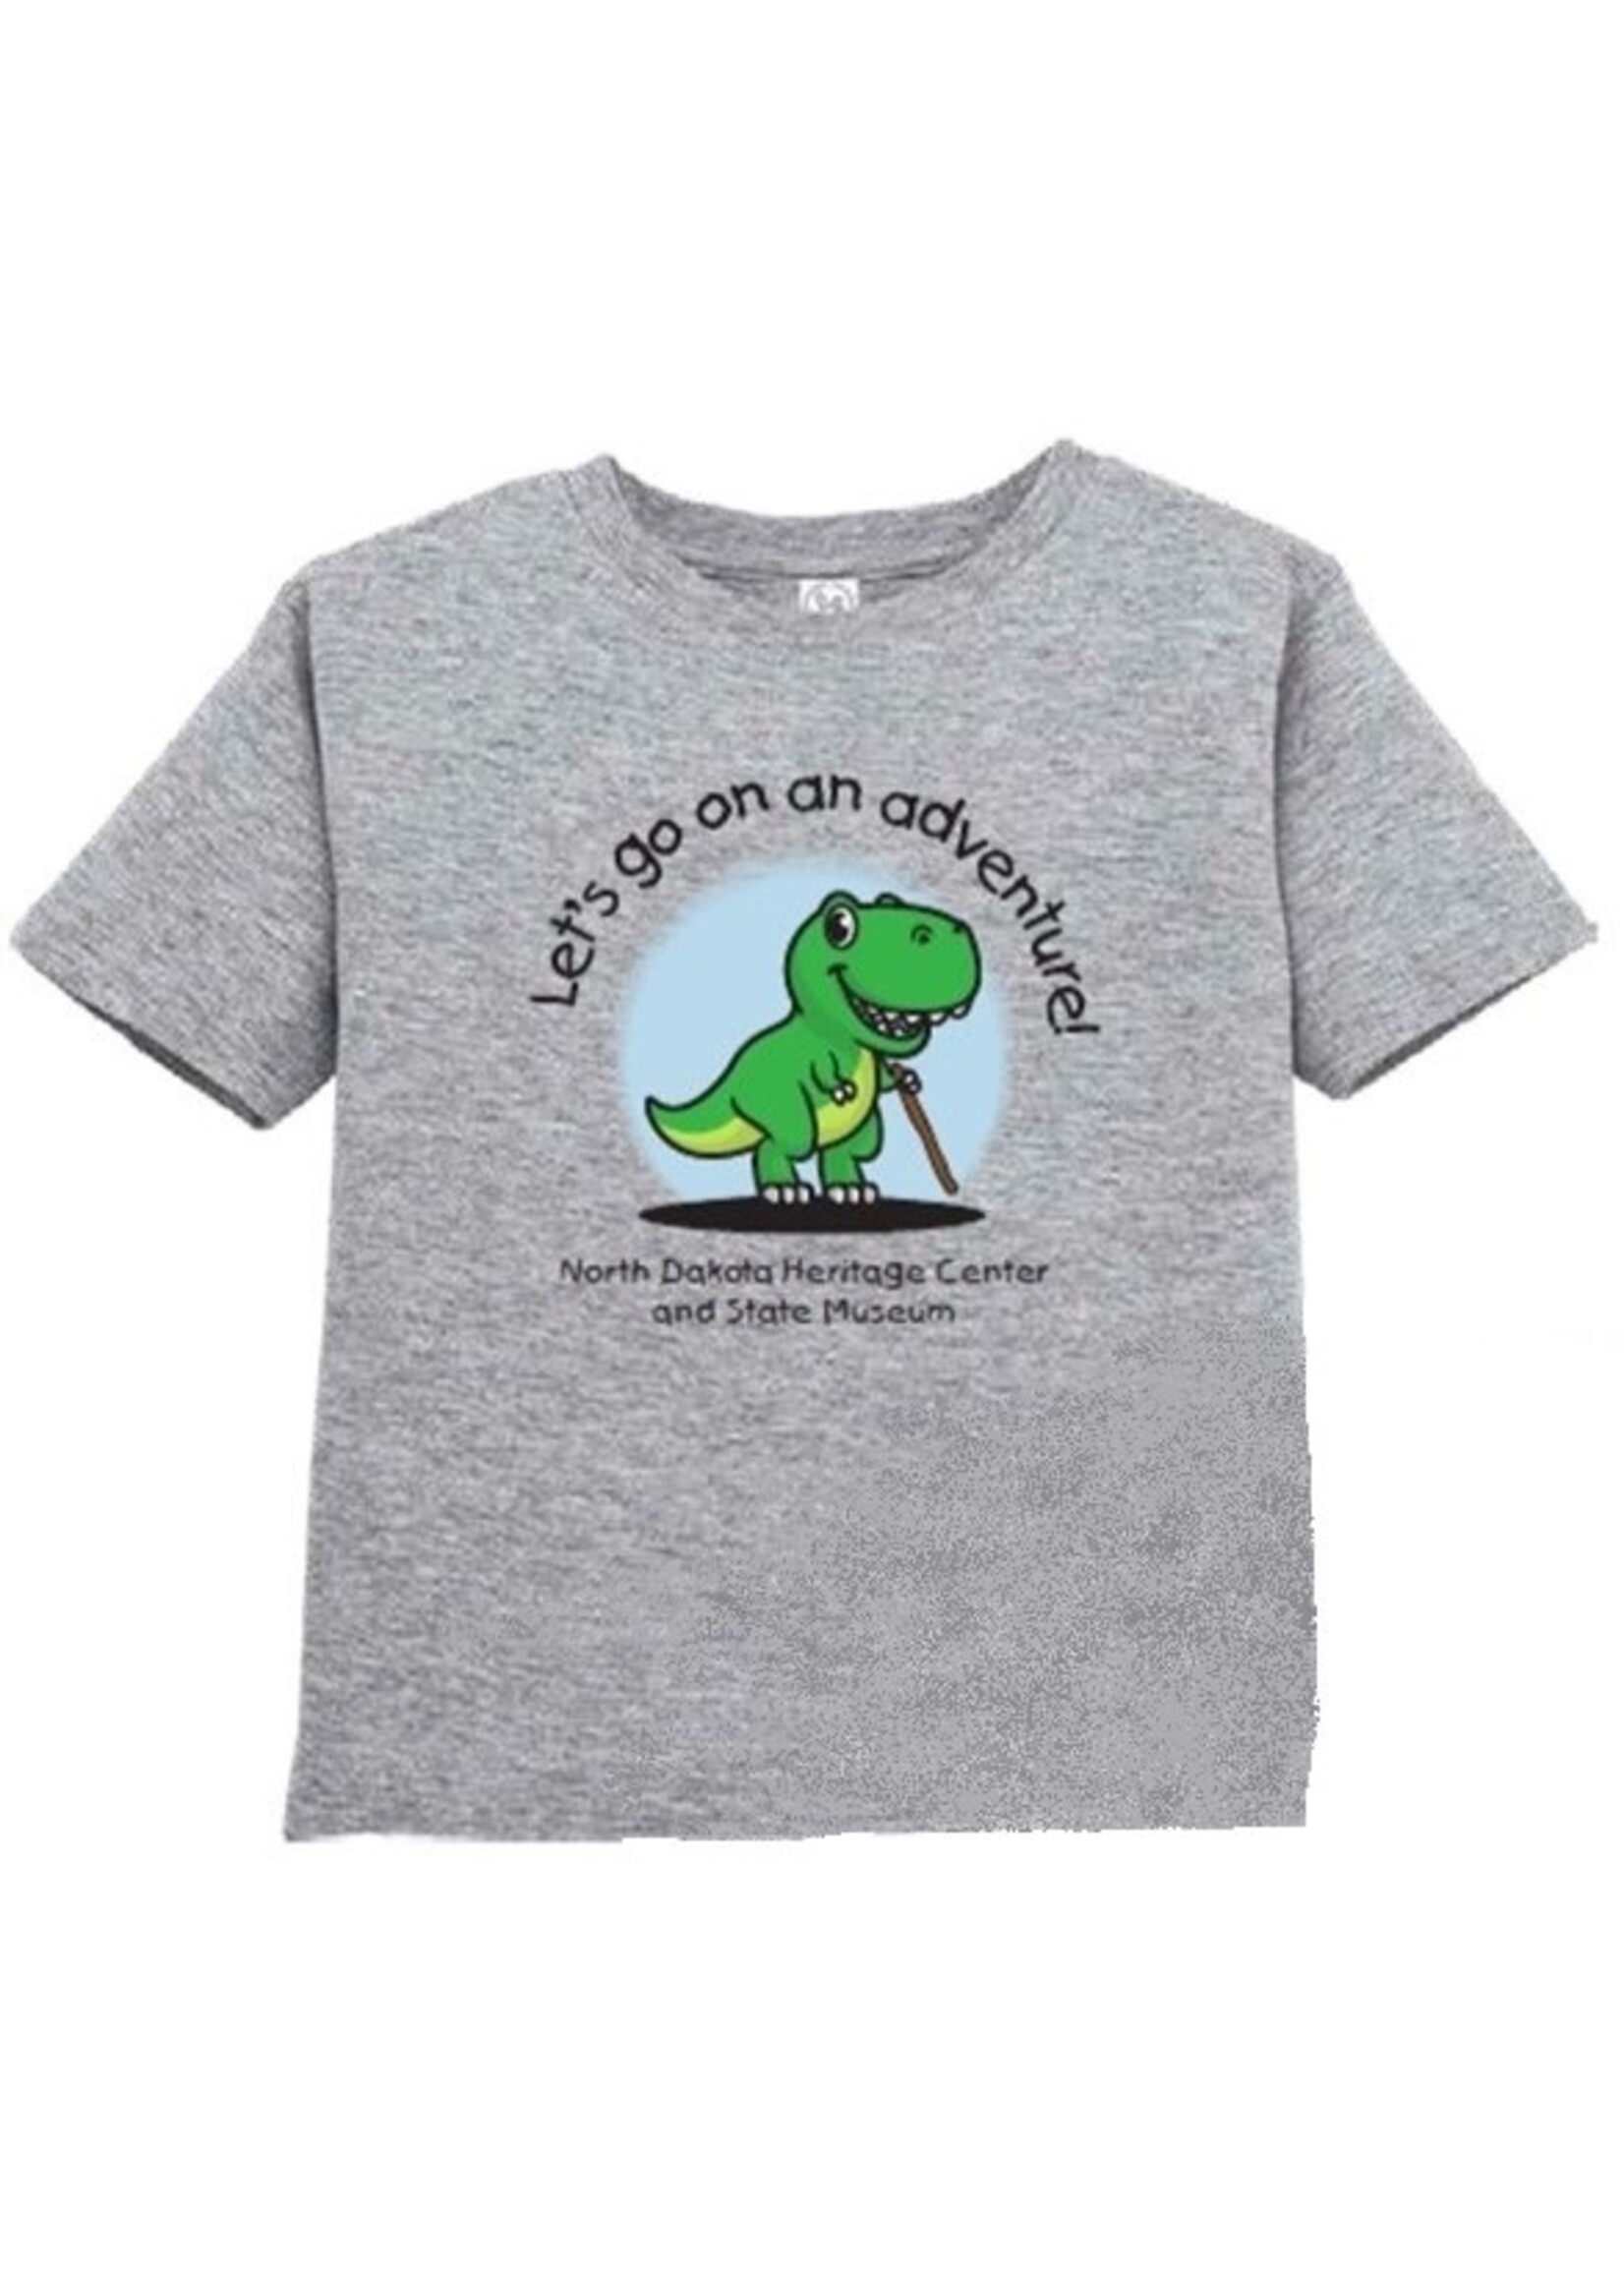 Let's Go On an Adventure! T-Rex Toddler Tee